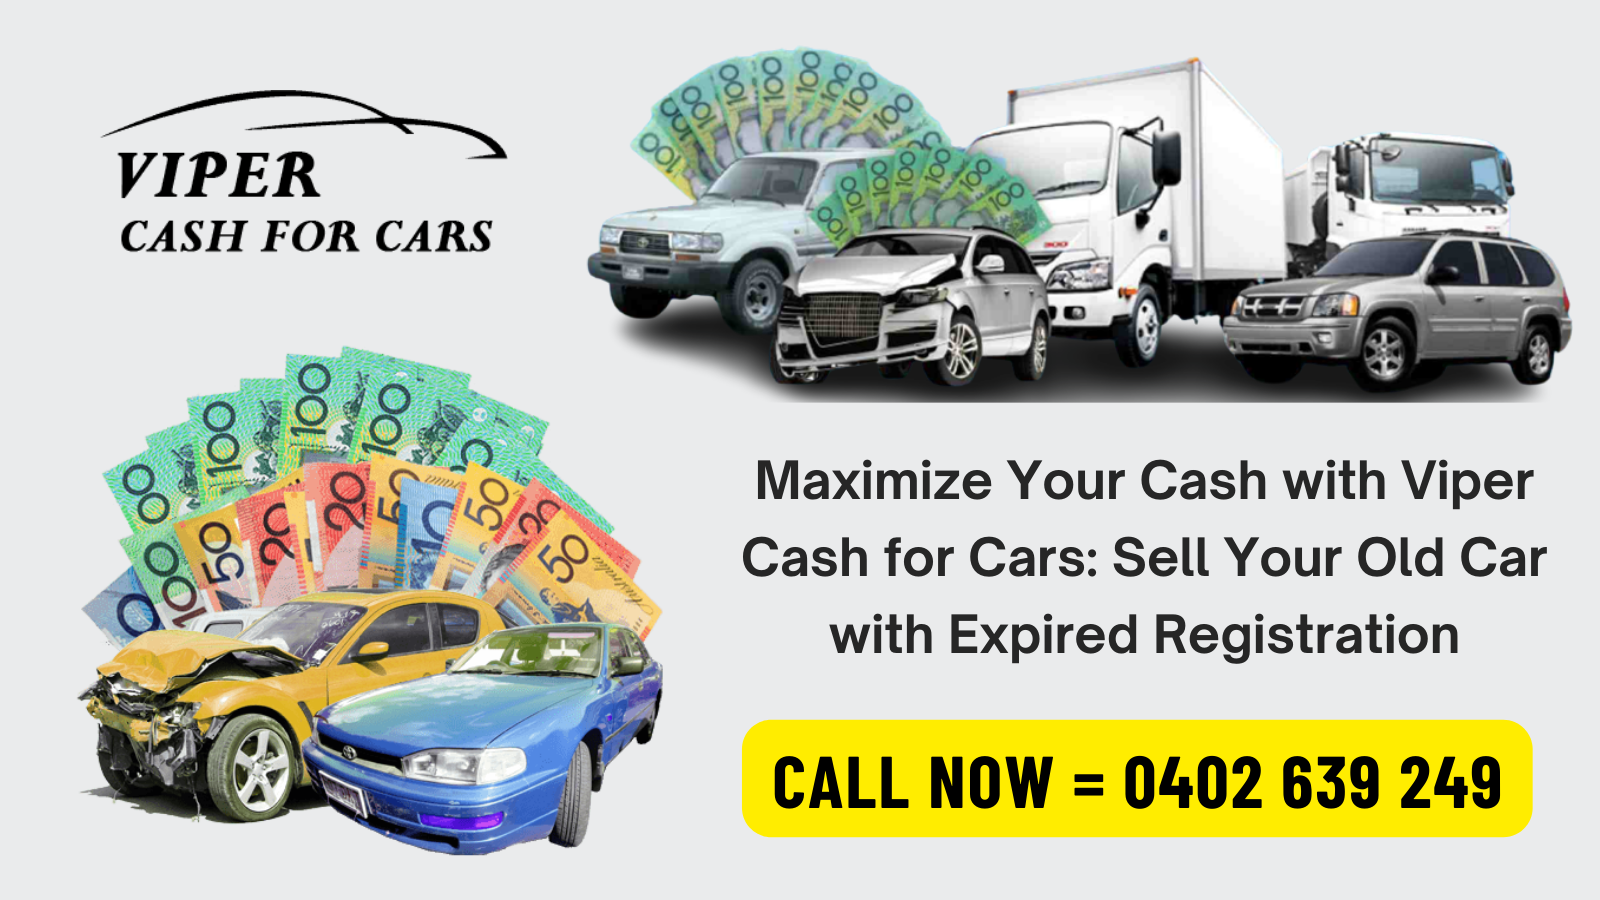 Maximize Your Cash with Viper Cash for Cars: Sell Your Old Car with Expired Registration